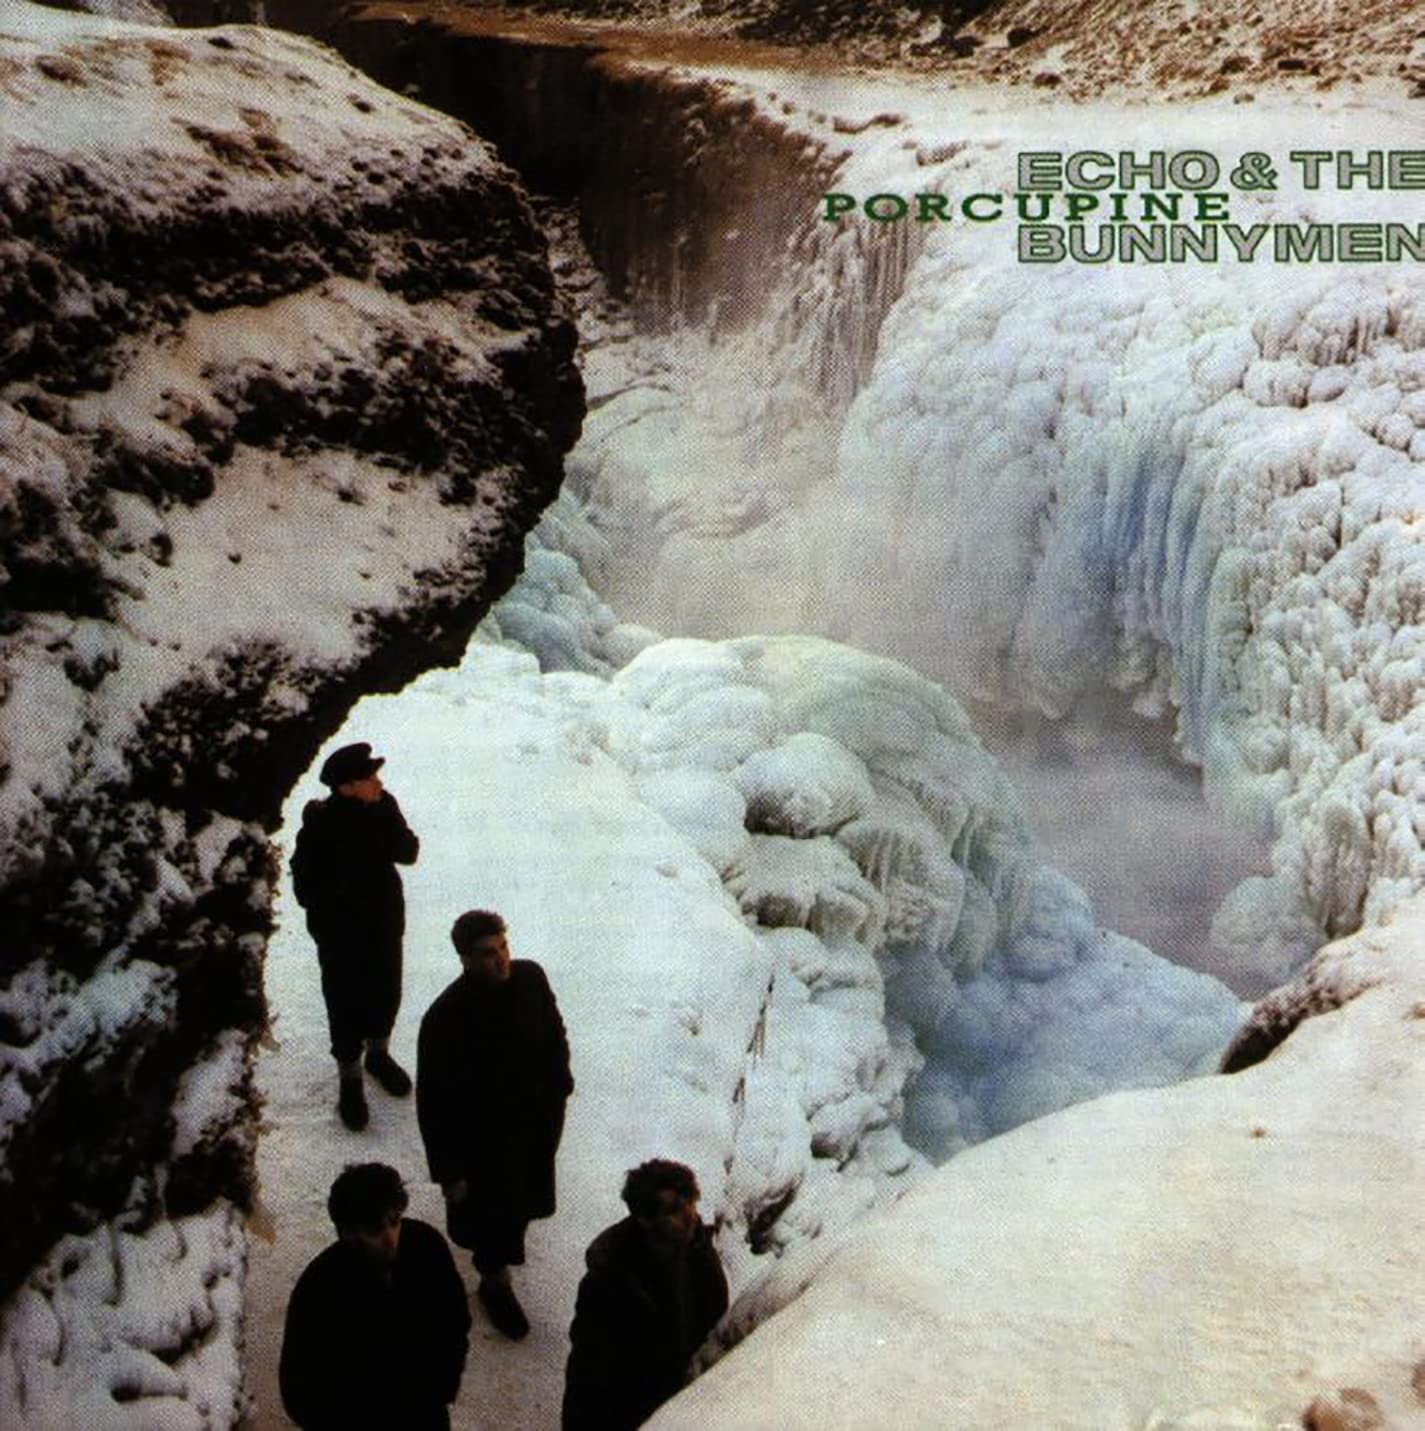 Echo And The Bunnymen - Porcupine - LP